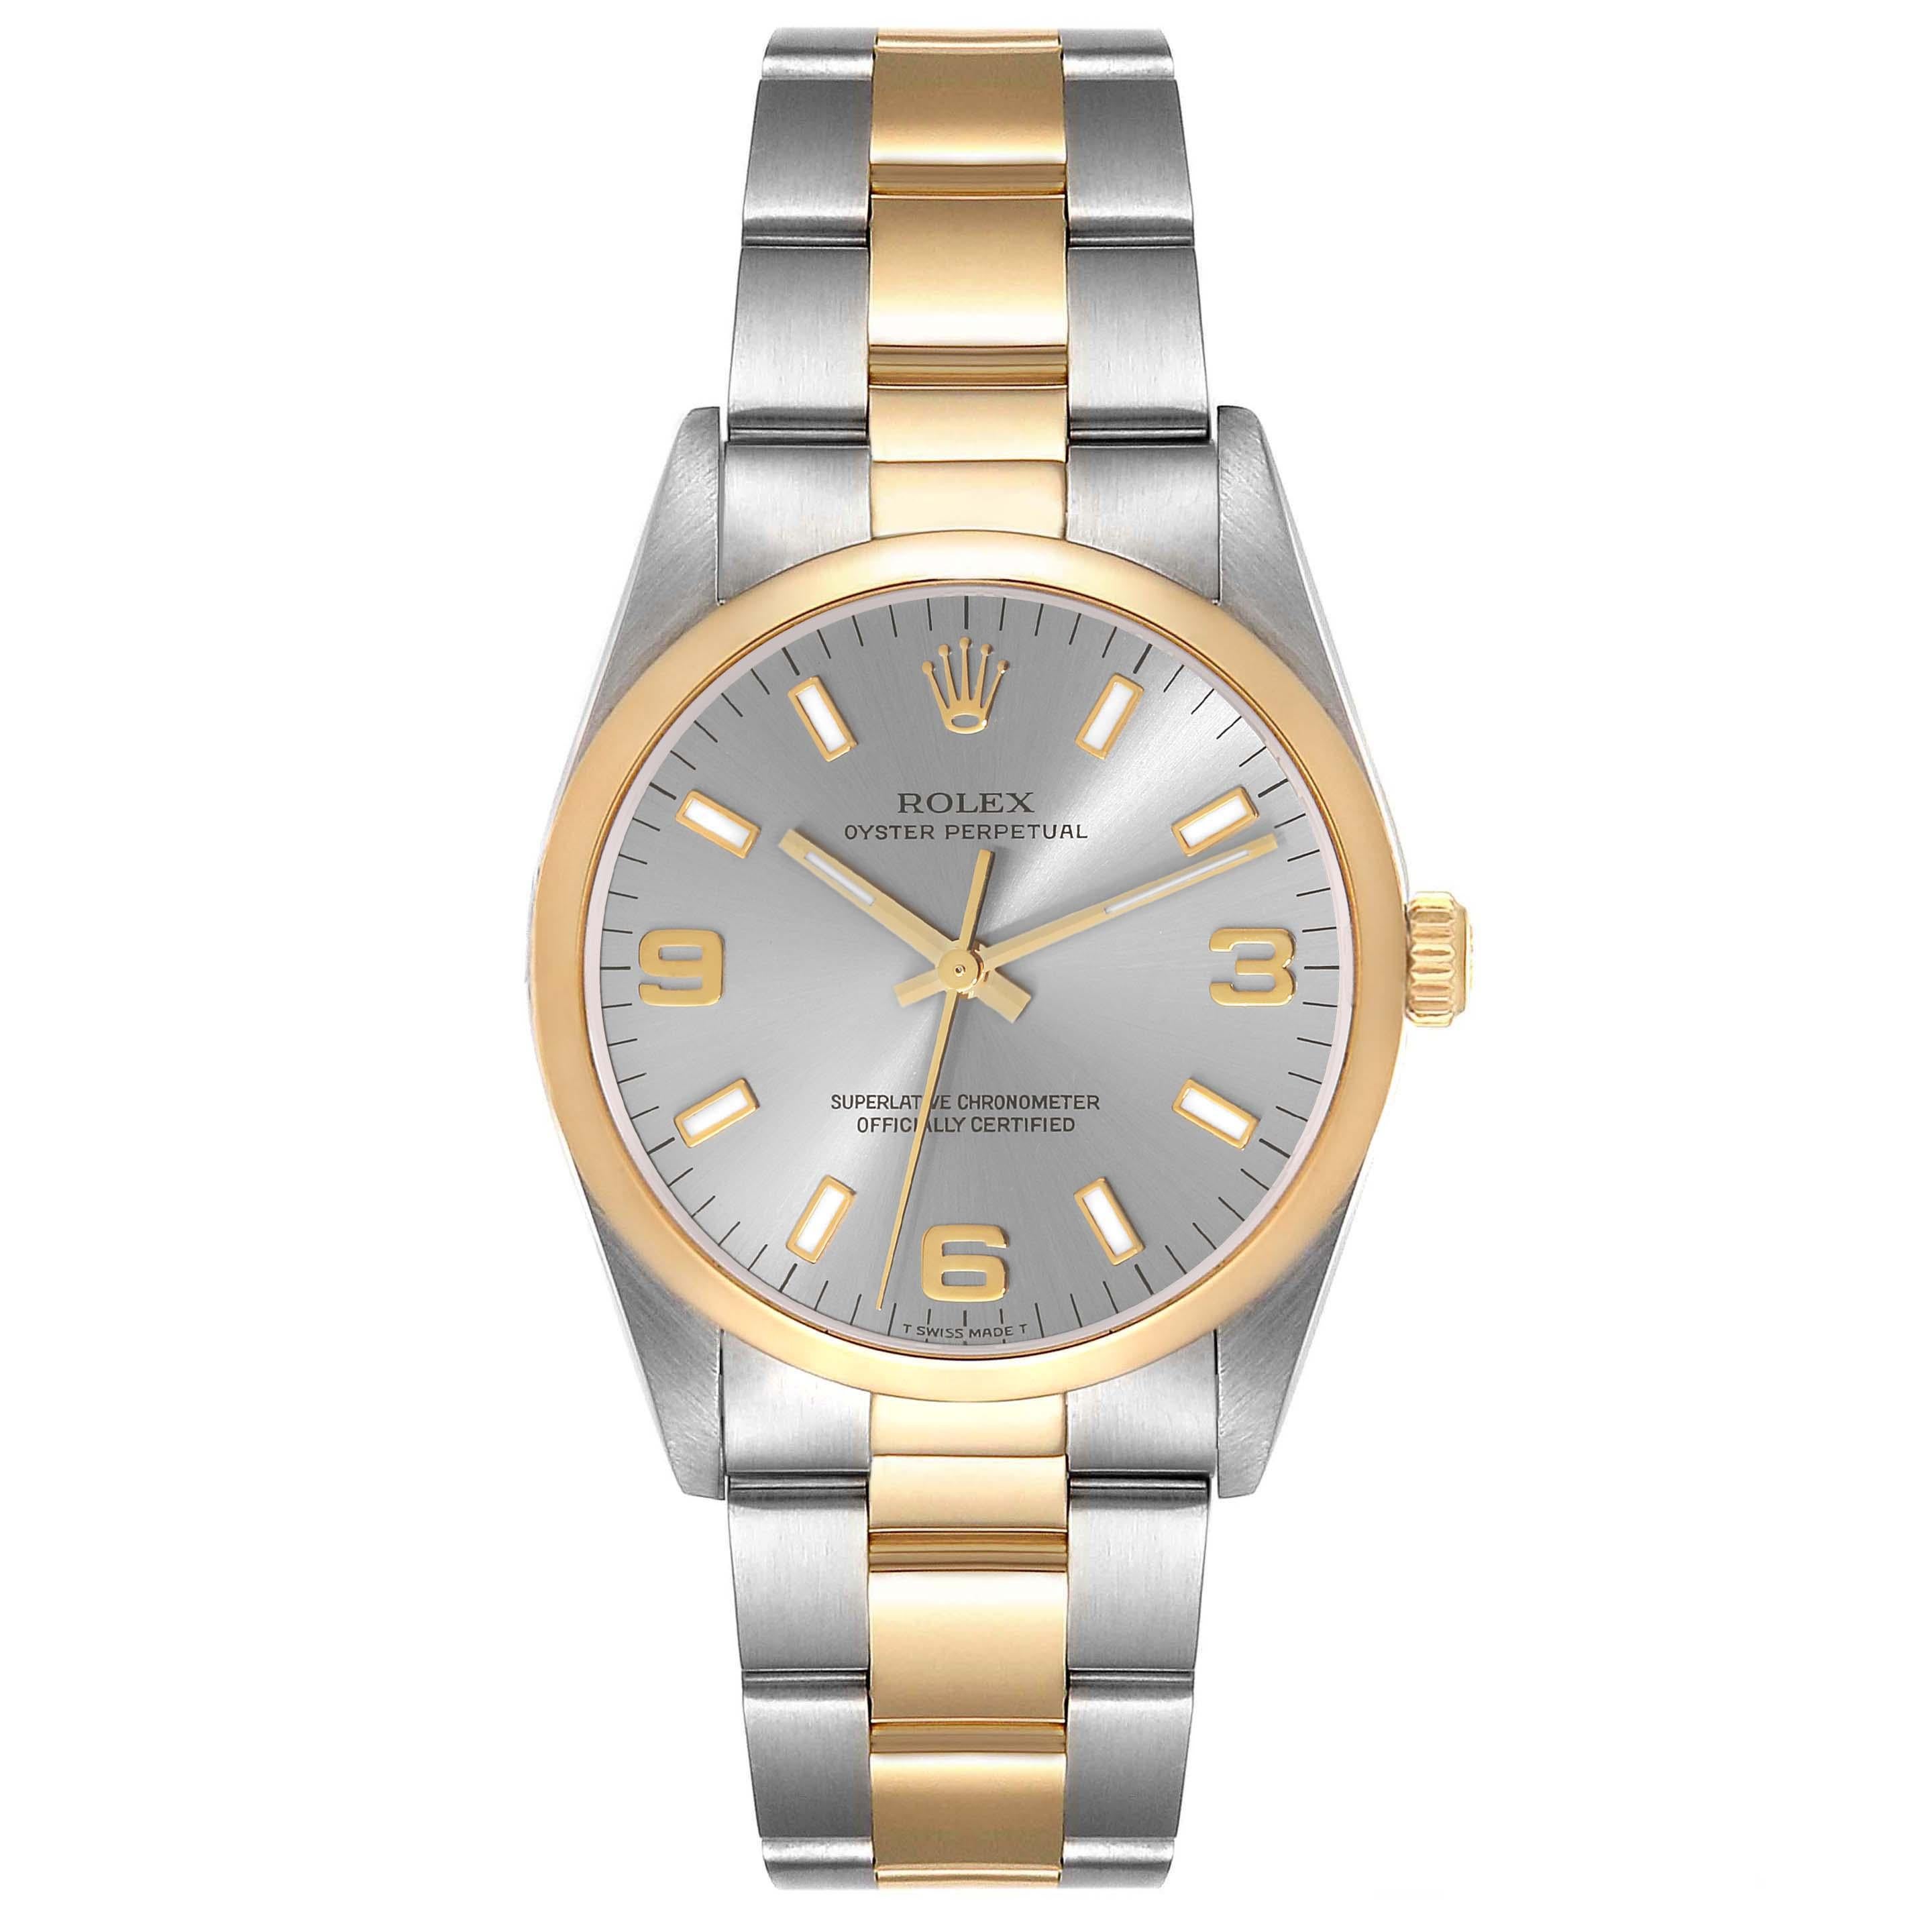 Rolex Oyster Perpetual Steel Yellow Gold Slate Dial Mens Watch 14203. Officially certified chronometer automatic self-winding movement. Stainless steel and 18K yellow gold oyster case 34.0 mm in diameter. Rolex logo on the crown. 18K yellow gold